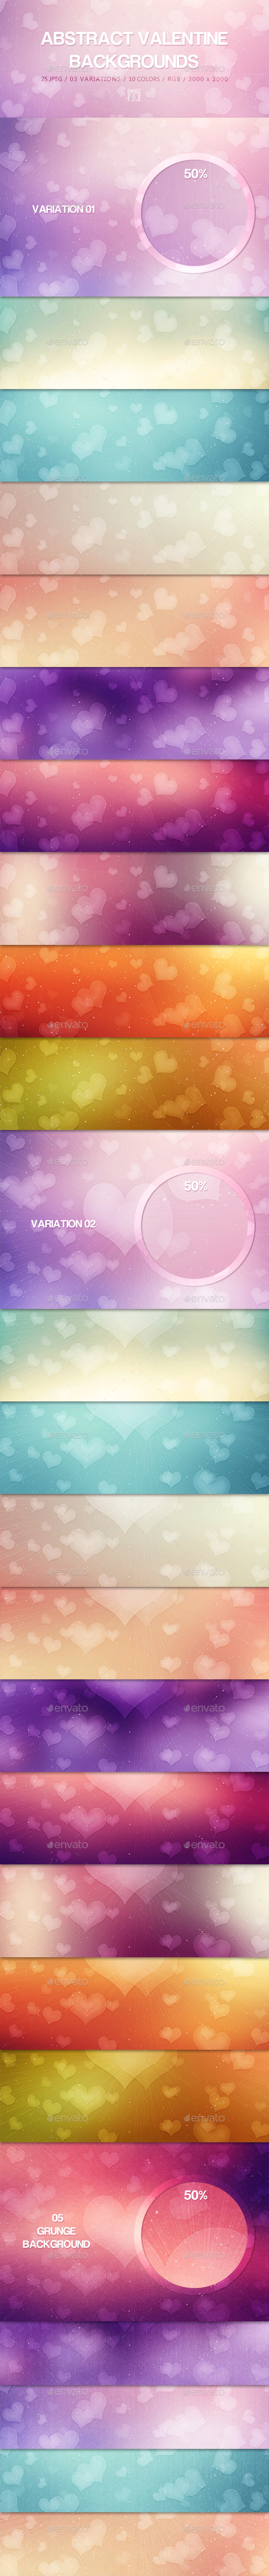 25 Abstract Valentine Backgrounds